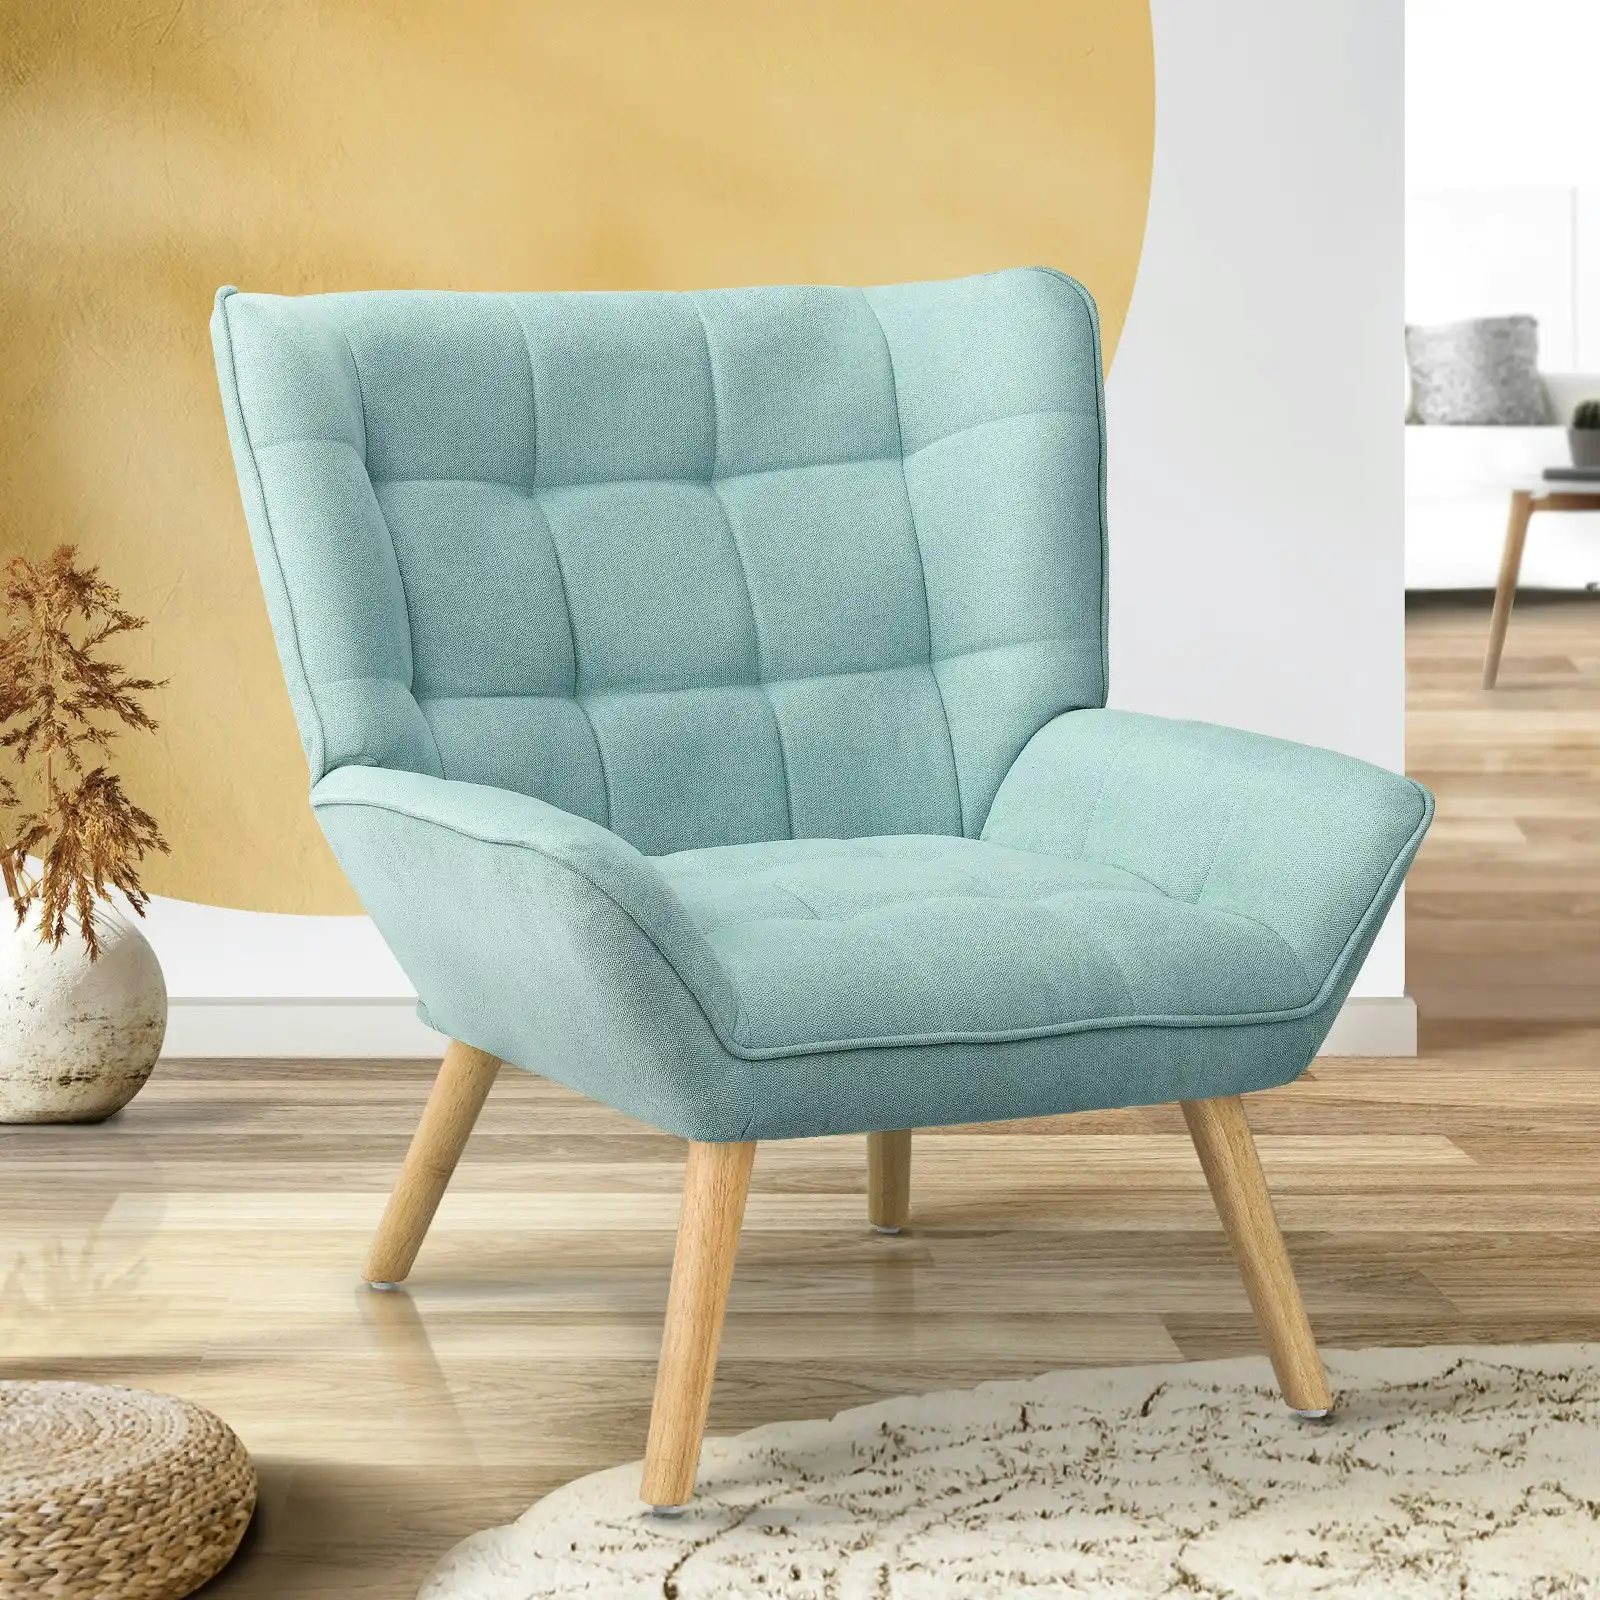 Oikiture Armchair Accent Chairs Sofa Lounge Fabric Upholstered Tub Chair Blue